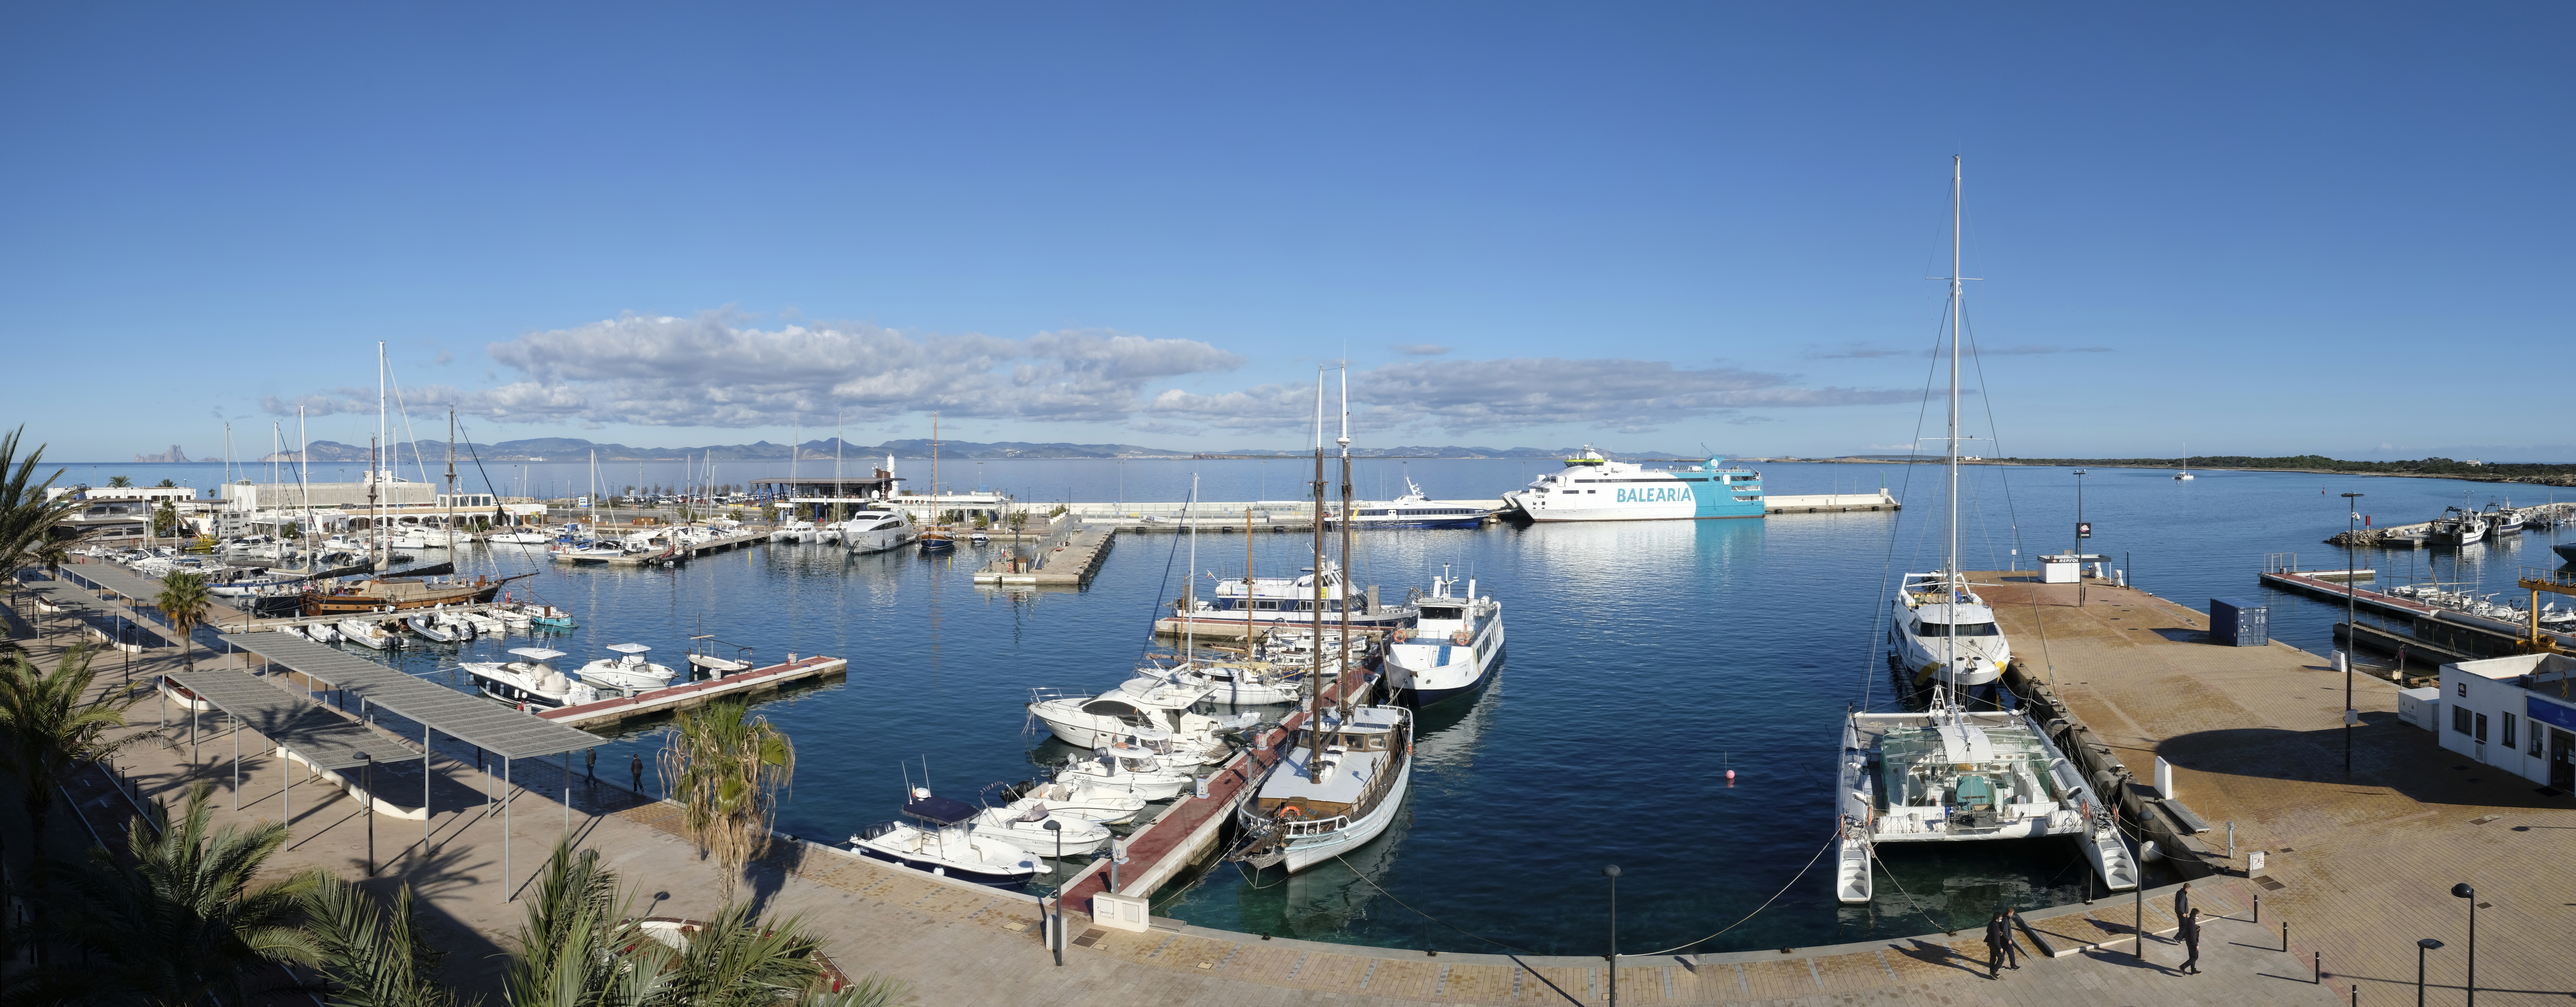 Puertos y Litorales Sostenibles (Sustainable Ports and Coastlines), chosen as the best solution for the management of a dry marina facility for small charter boats in the port of La Savina